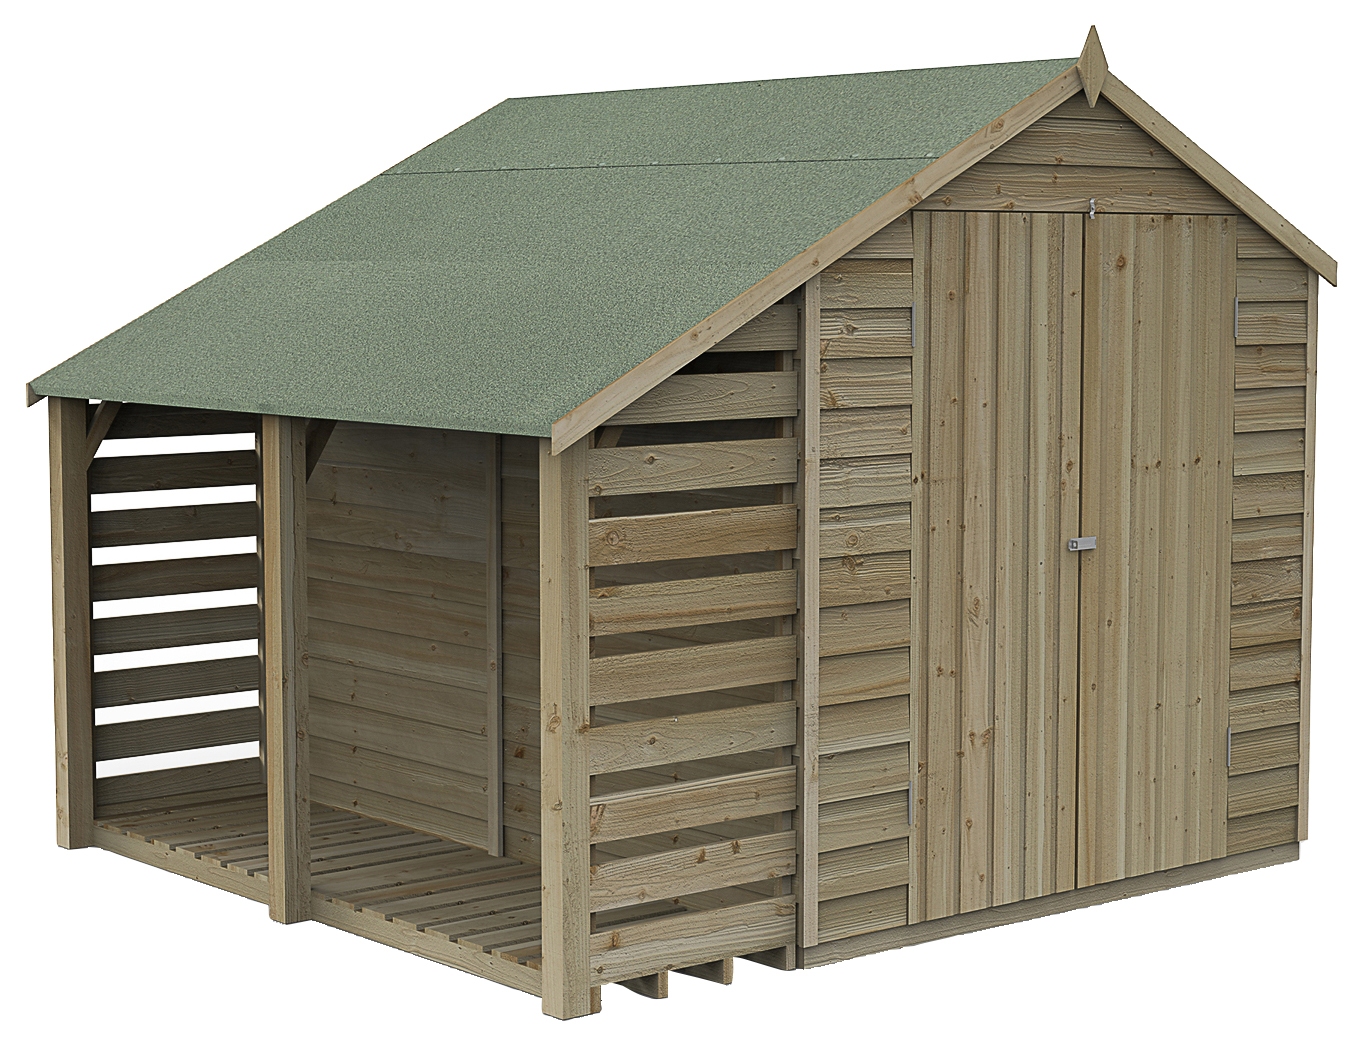 Image of Forest Garden 8 x 6ft 4Life Apex Overlap Pressure Treated Double Door Shed with Lean-To and Assembly